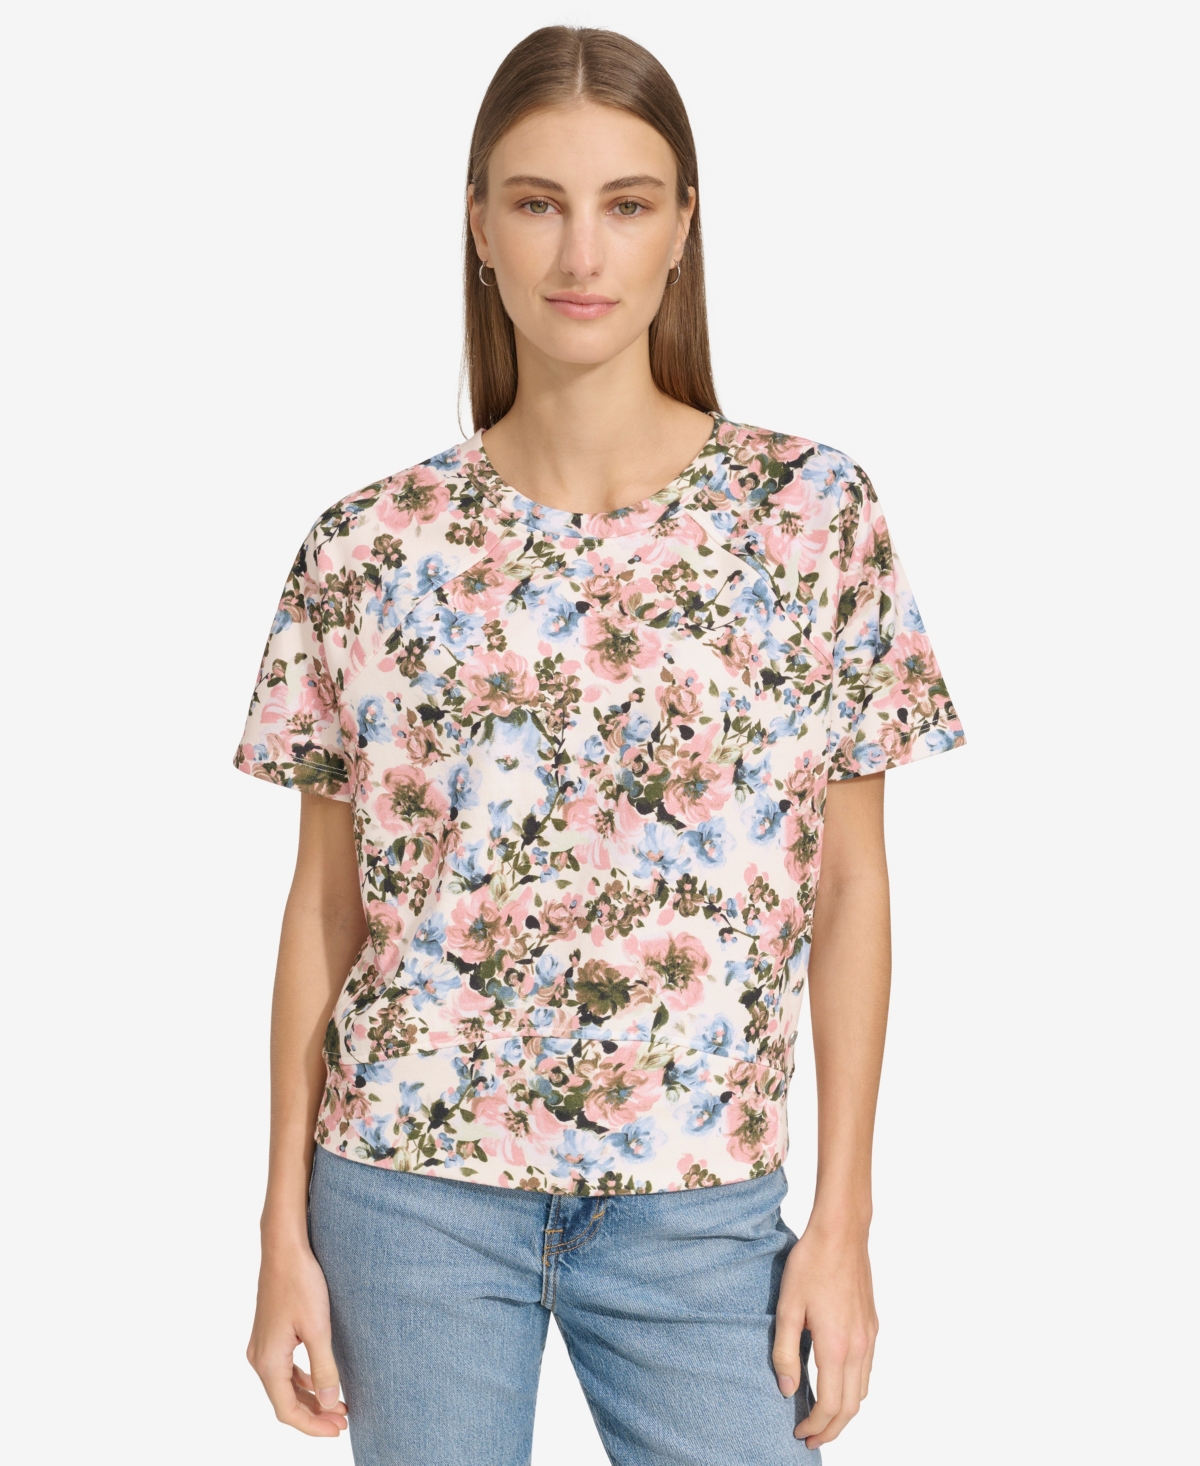 Andrew Marc Sport Women's Short-Sleeve French Terry Top - Rose Mixed Floral